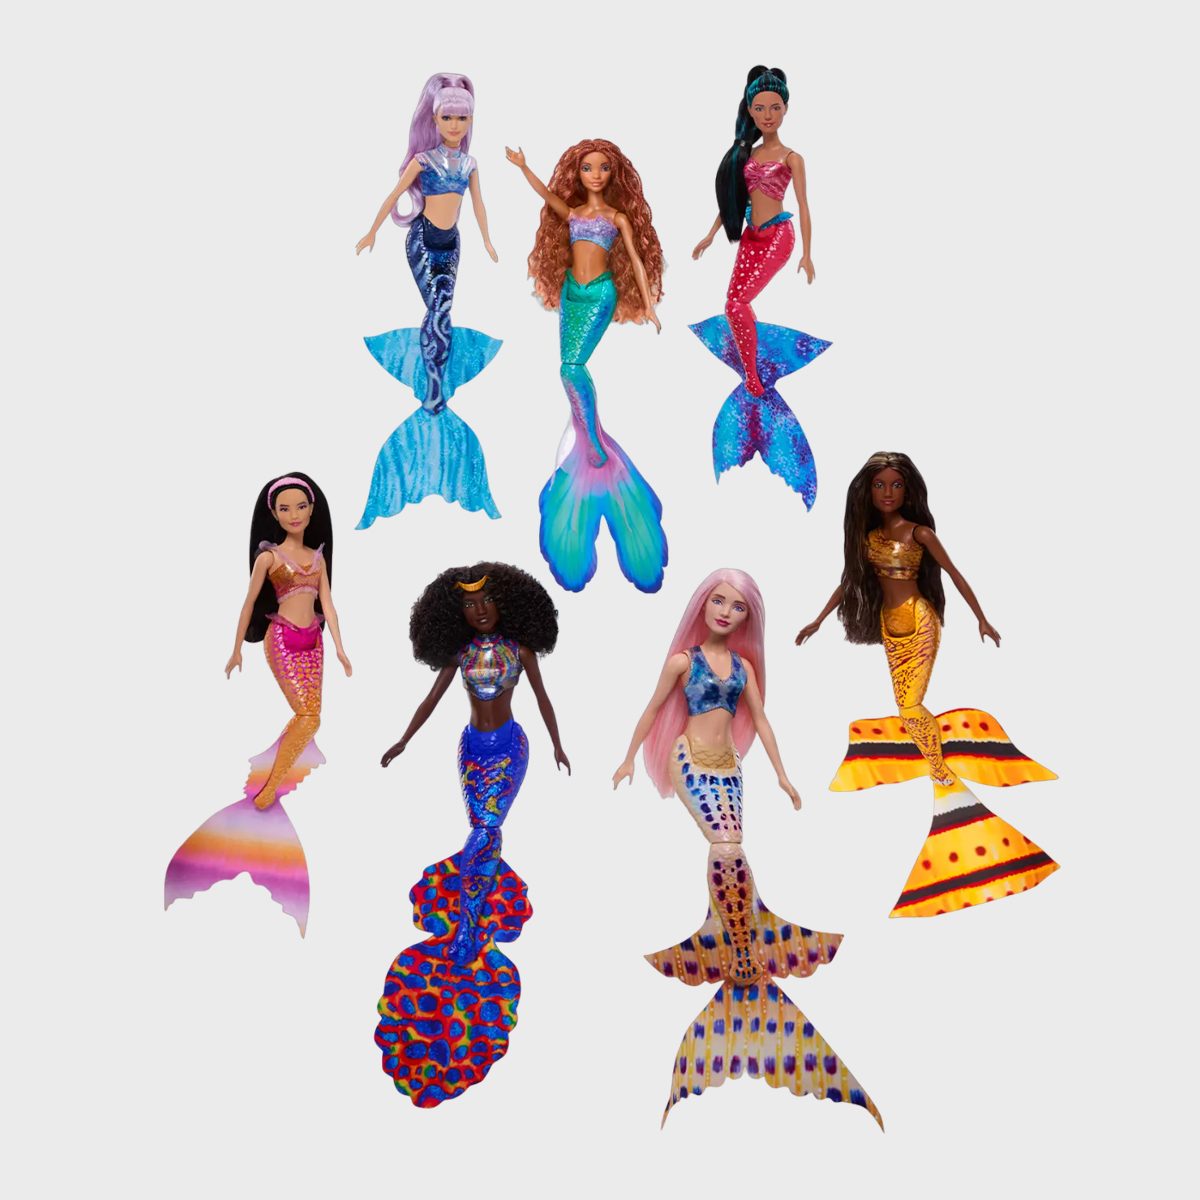 <p>She'll become part of their world while she plays with this <a href="https://www.walmart.com/ip/Disney-The-Little-Mermaid-Ultimate-Ariel-Sisters-Doll-7-Pack-Set-with-7-Fashion-Mermaid-Dolls/1101005012" rel="noopener noreferrer">Ariel and Sisters doll set</a>. It includes beautifully detailed Ariel, Caspia, Indira, Perla, Karina, Mala and Tamika dolls that girls can use to recreate their favorite scenes from the movie or direct all new scenes of their own with these gifts for girls. Can they recite these <a href="https://www.rd.com/article/disney-movie-quotes/" rel="noopener noreferrer">Disney quotes</a>?</p> <p class="listicle-page__cta-button-shop"><a class="shop-btn" href="https://www.walmart.com/ip/Disney-The-Little-Mermaid-Ultimate-Ariel-Sisters-Doll-7-Pack-Set-with-7-Fashion-Mermaid-Dolls/1101005012">Shop Now</a></p>